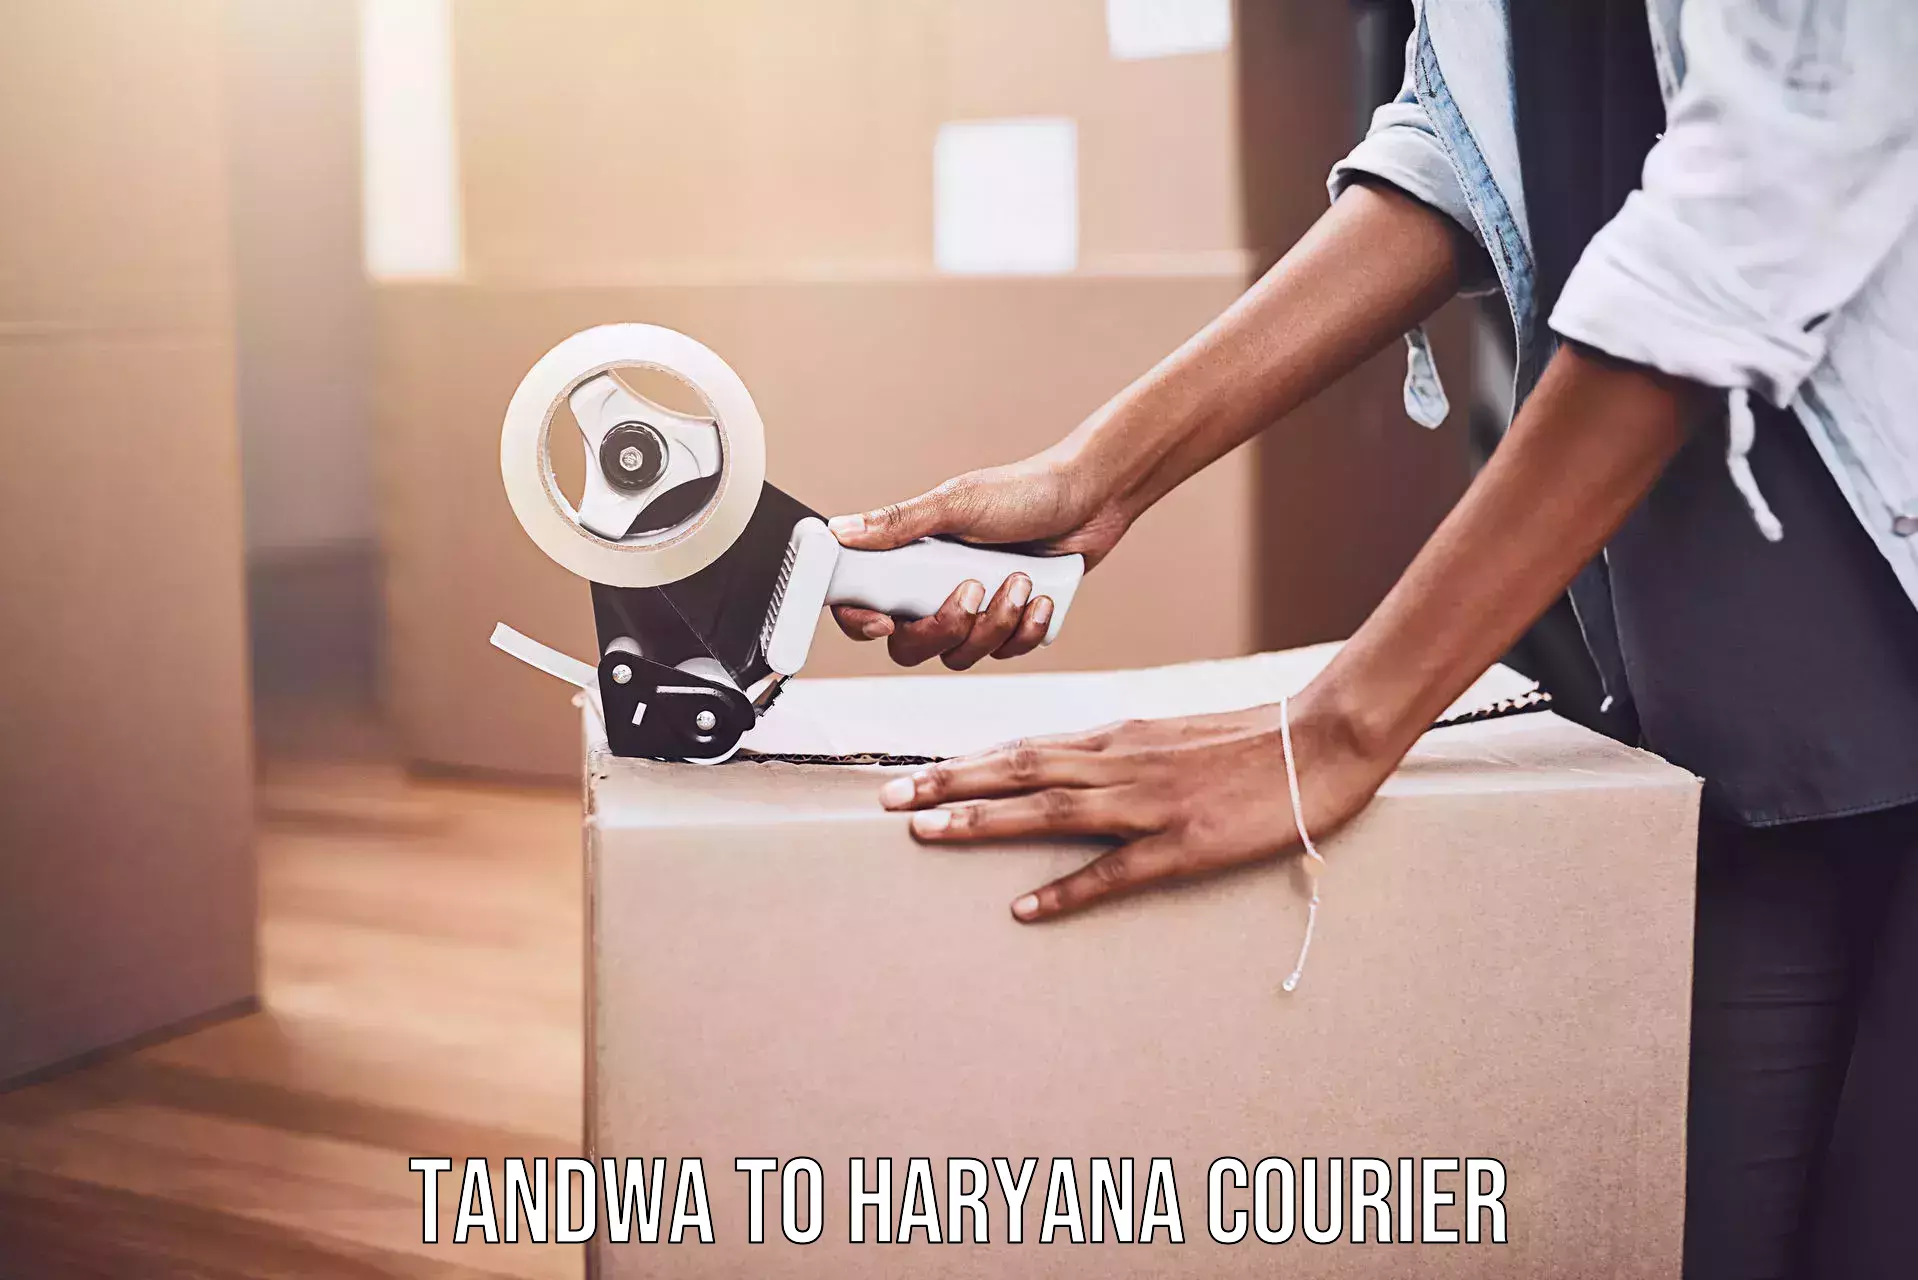 Weekend courier service in Tandwa to Haryana